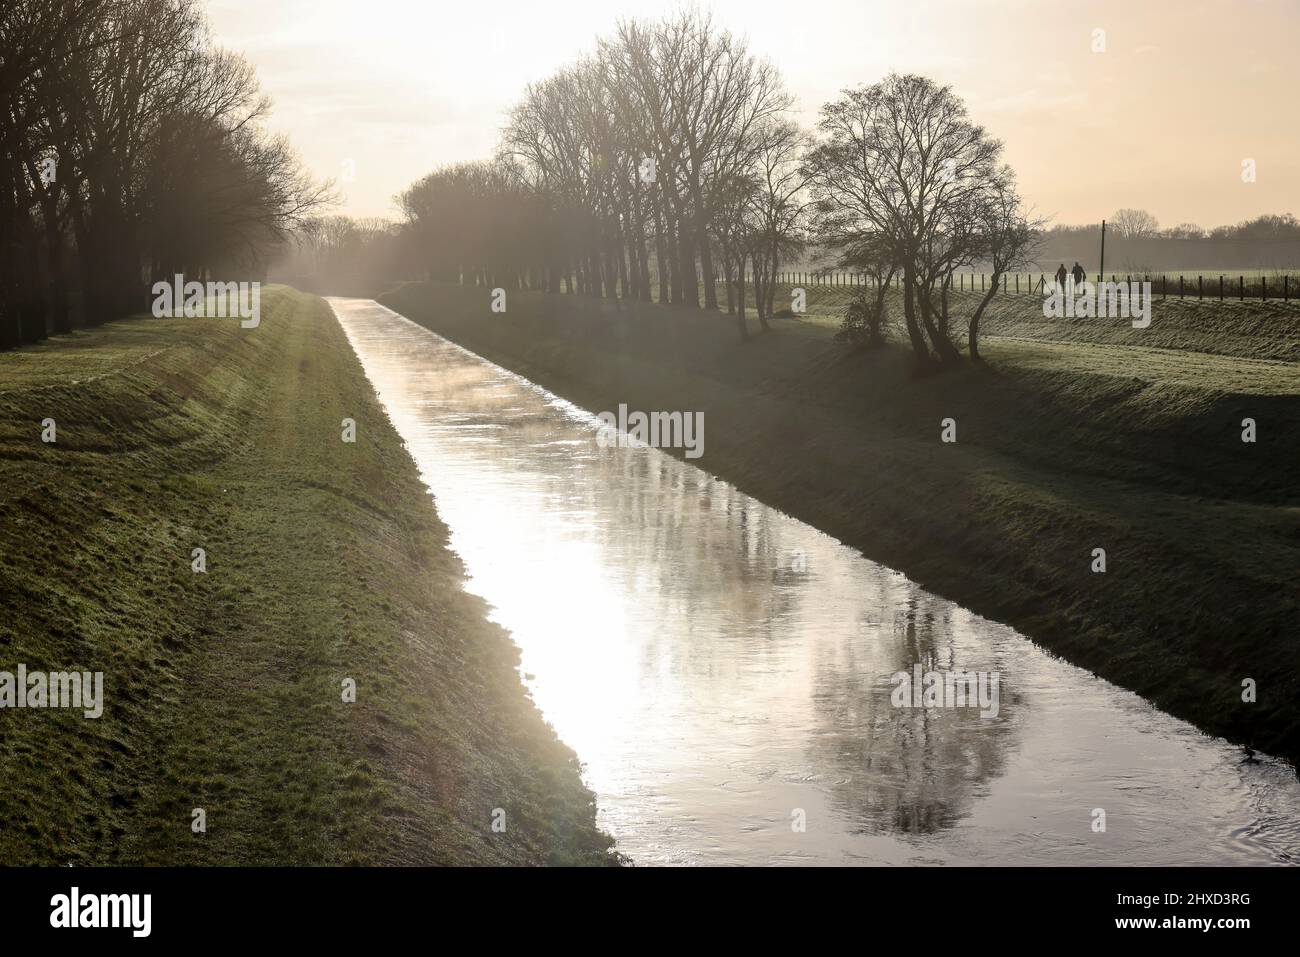 Dinslaken, North Rhine-Westphalia, Germany - The Emscher River has been completely free of wastewater since January 2022 following the construction of a parallel sewer. The river was previously an open, above-ground wastewater canal, combined sewer with surface water and sewage. Stock Photo